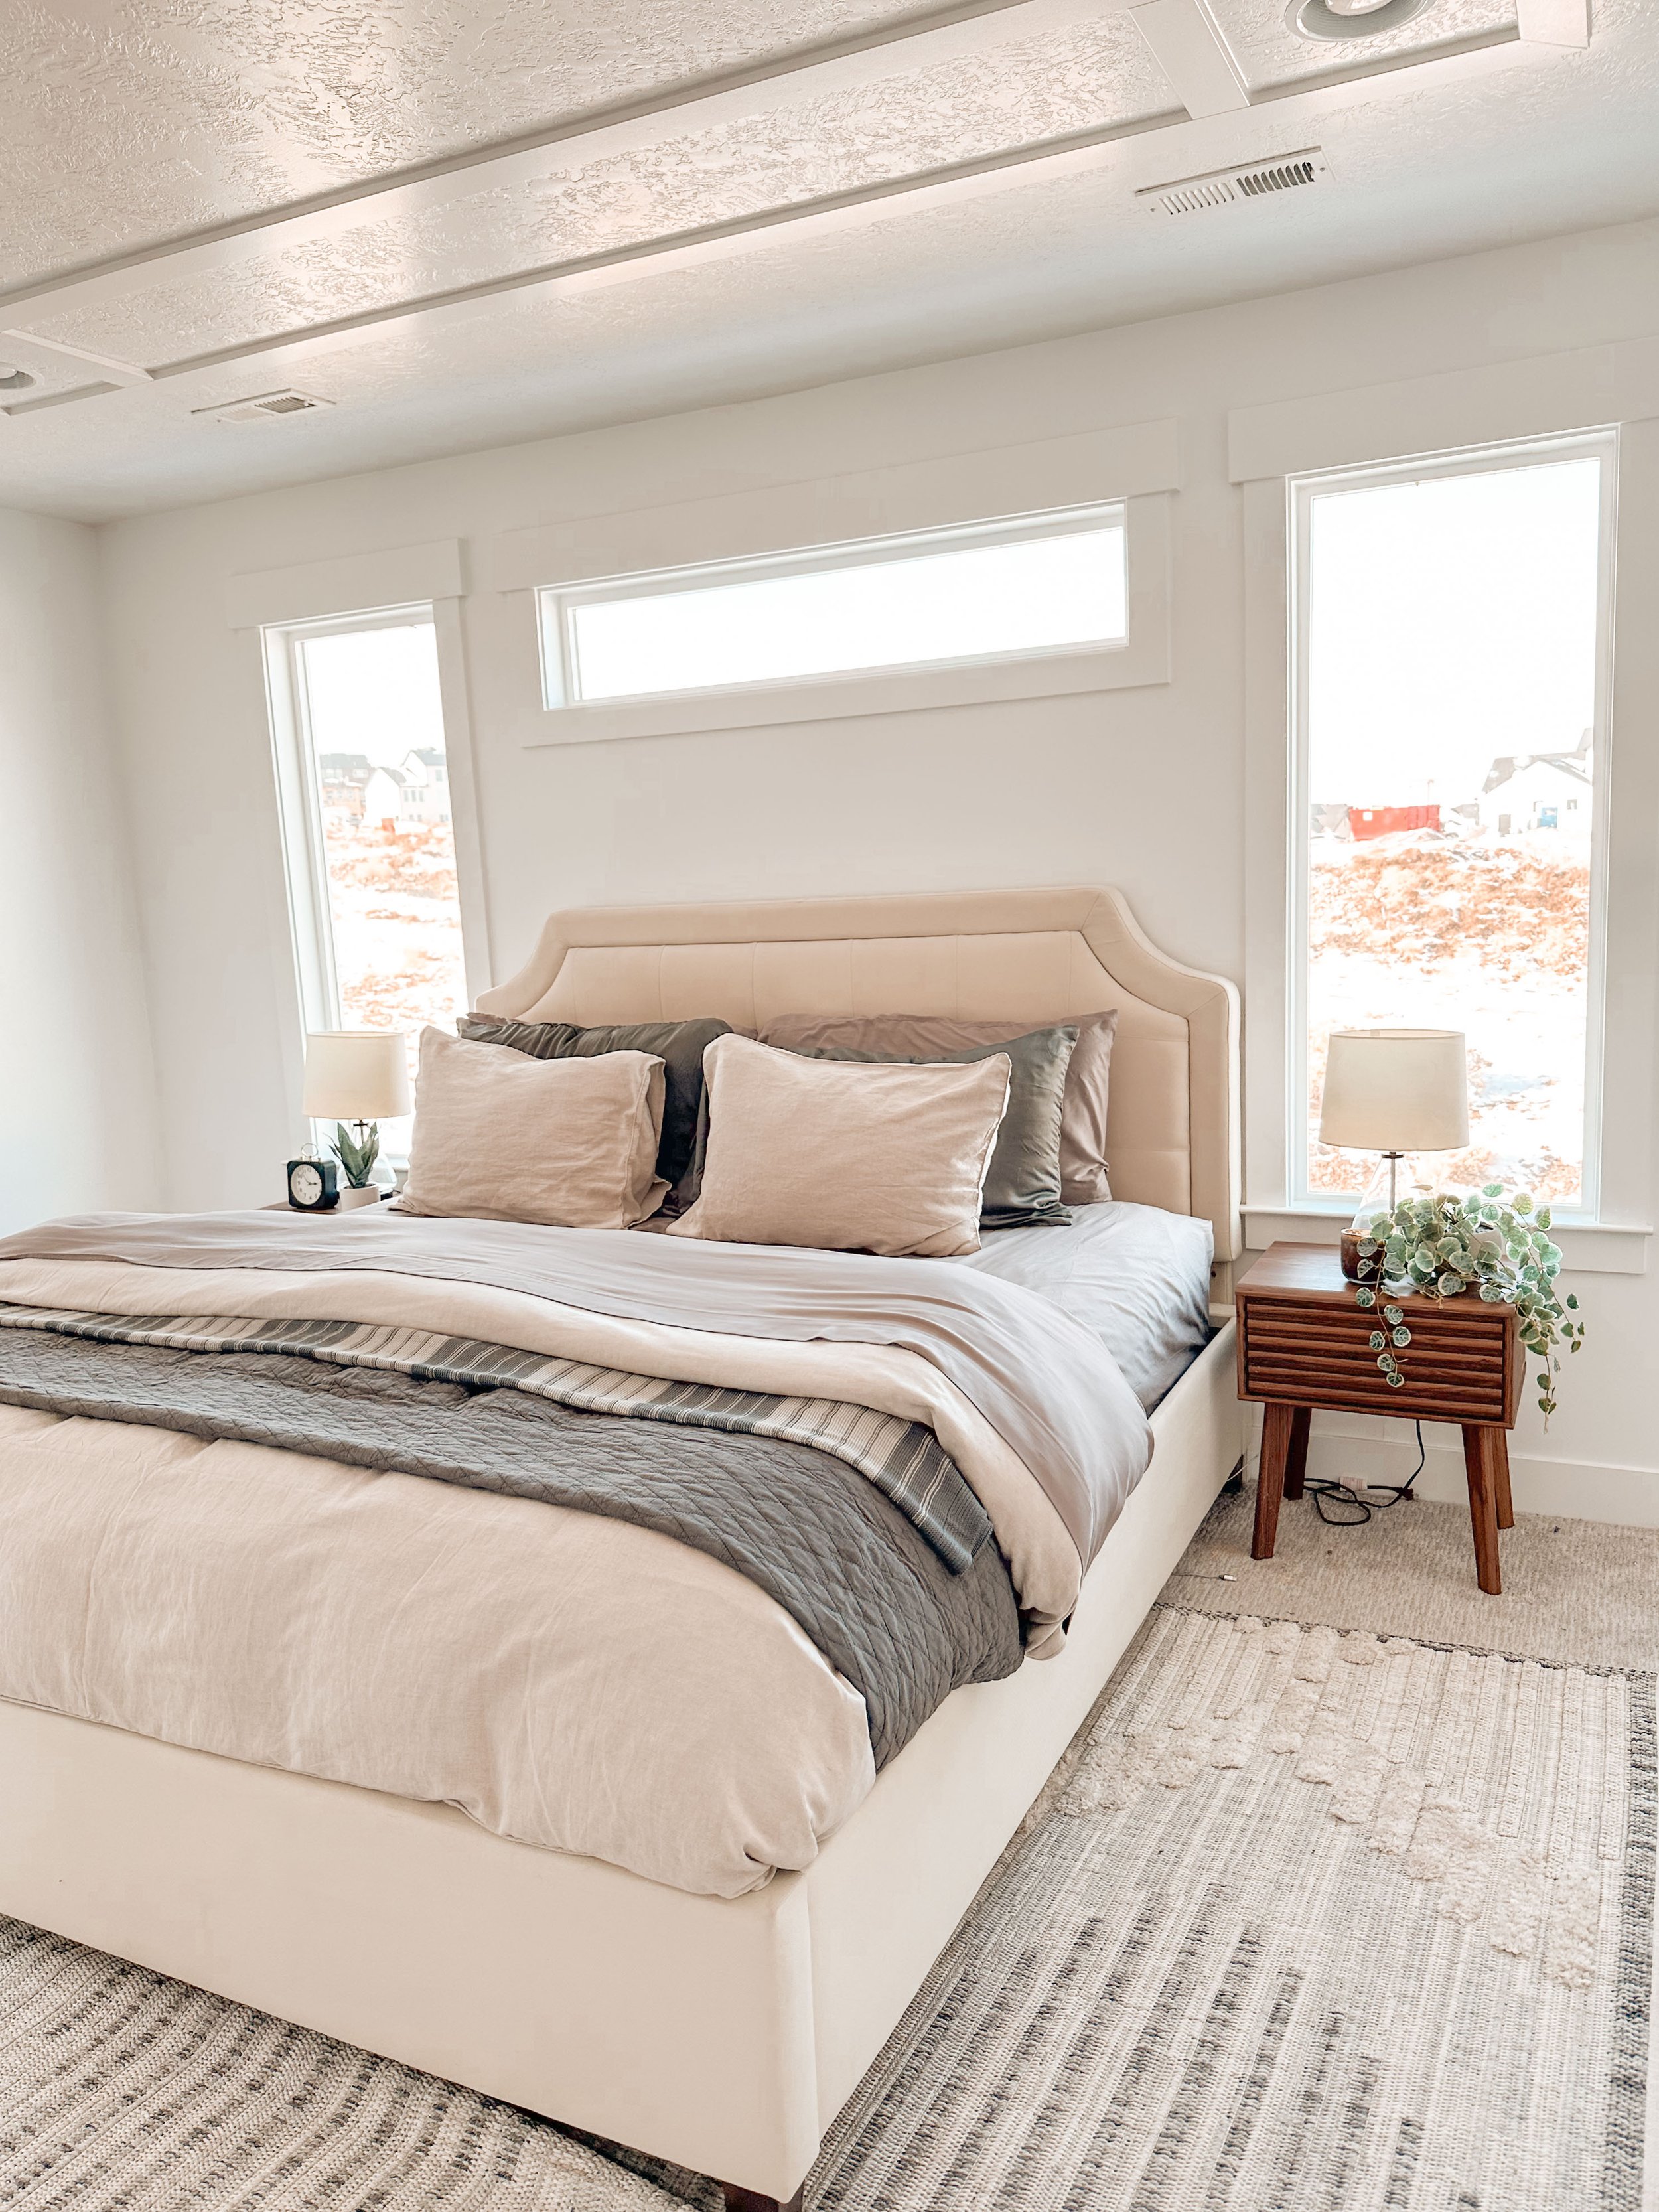 Moody Bedroom Bedding Refresh with Cariloha